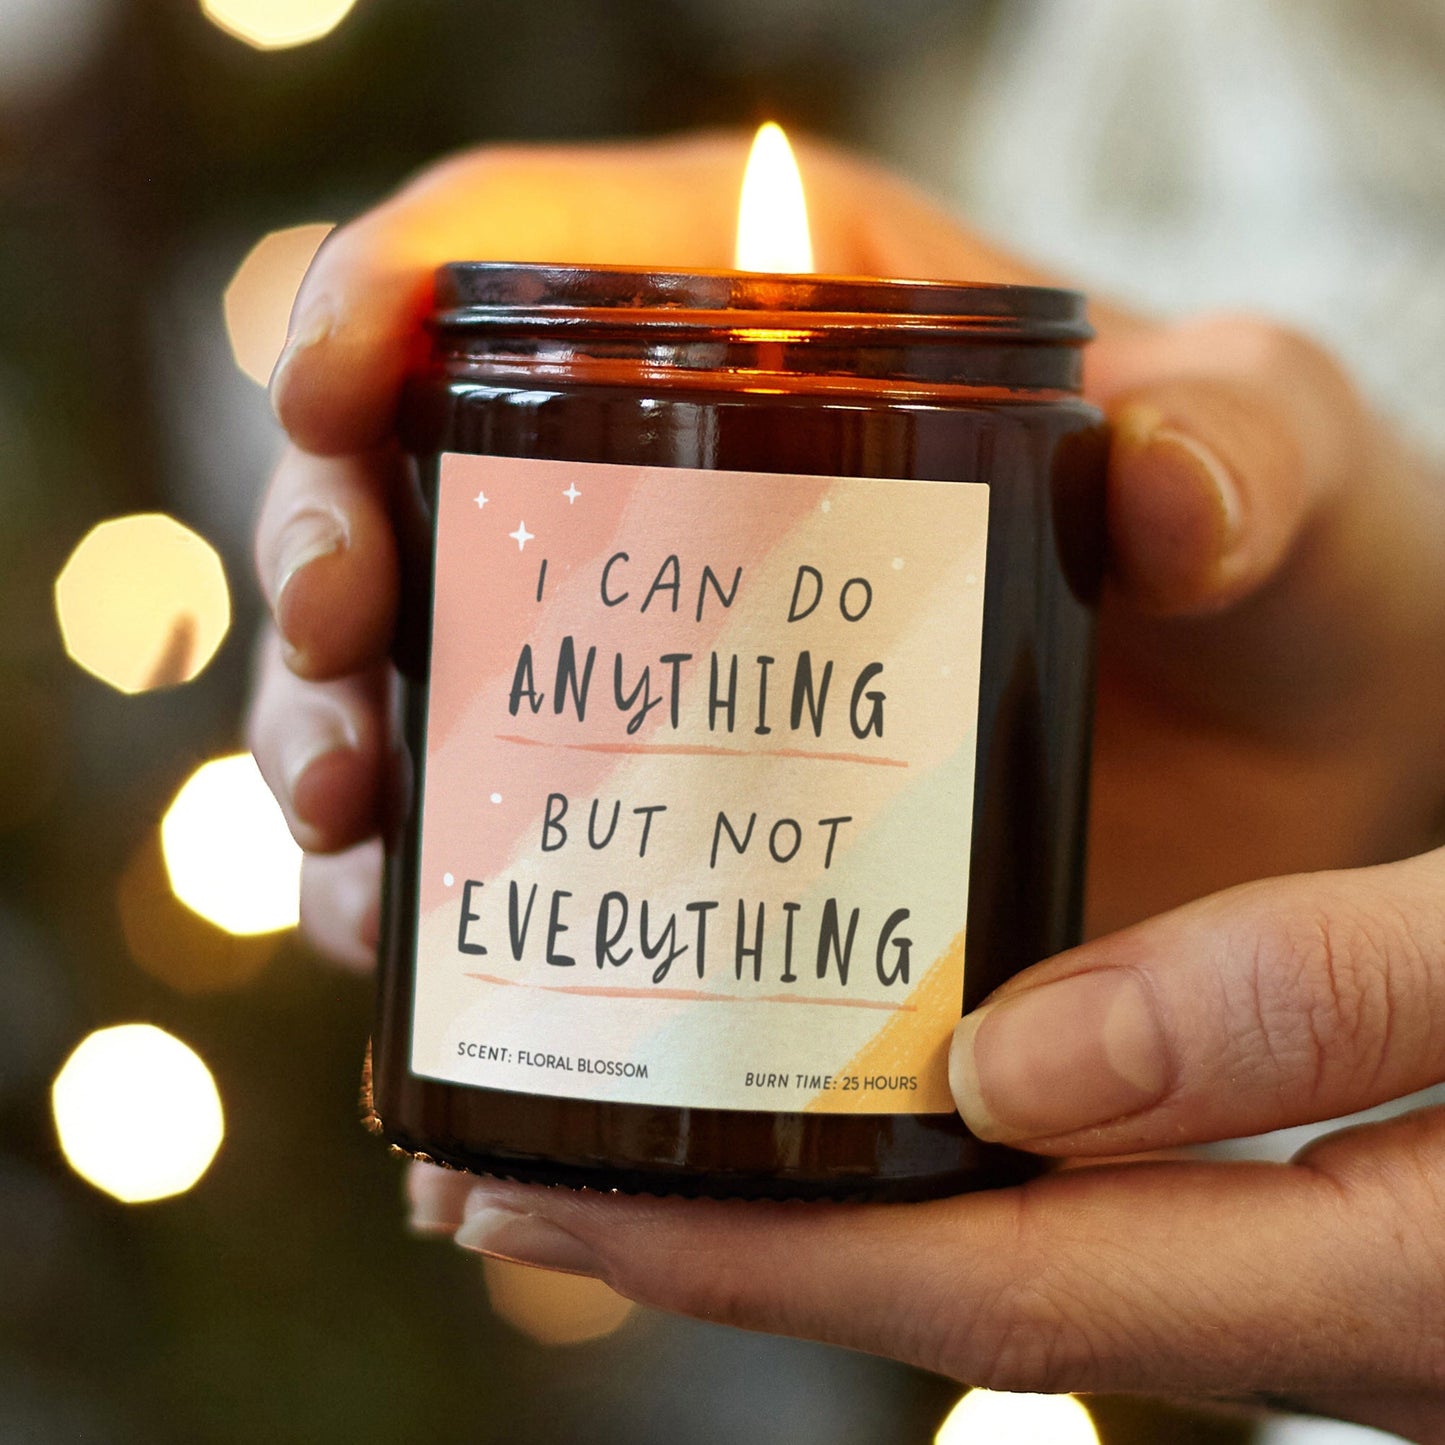 I Can Do Anything Positivity Affirmation Candle - Kindred Fires